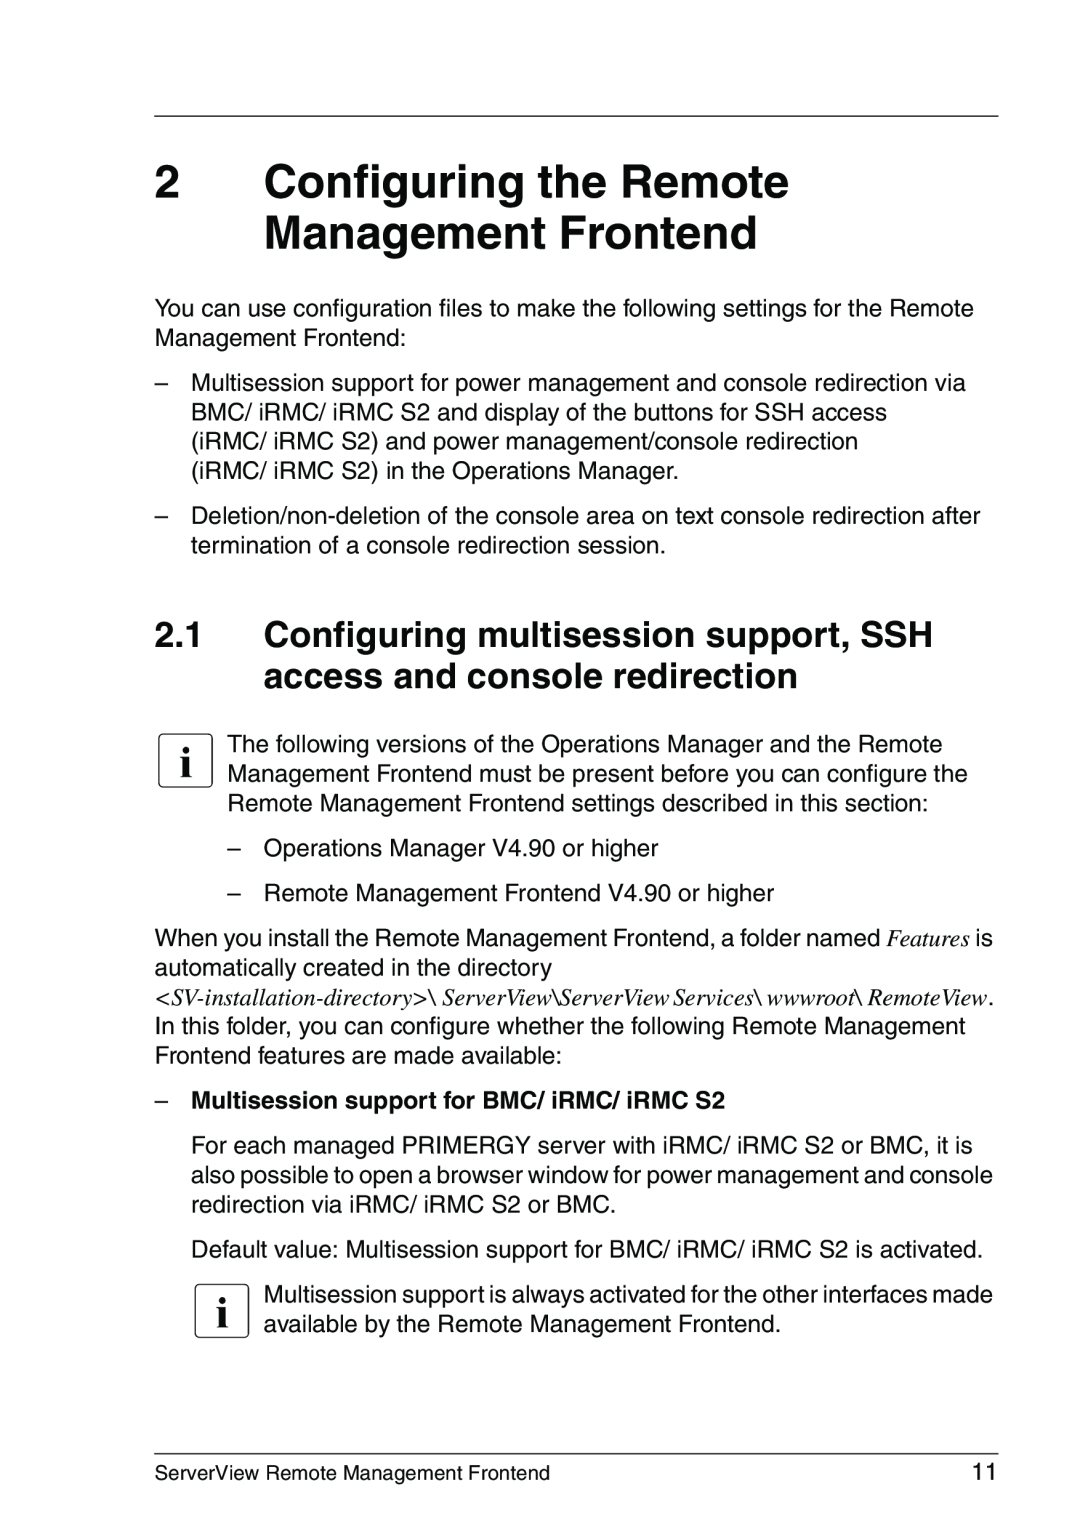 Fujitsu V4.90 manual Configuring the Remote Management Frontend, Multisession support for BMC/ iRMC/ iRMC S2 